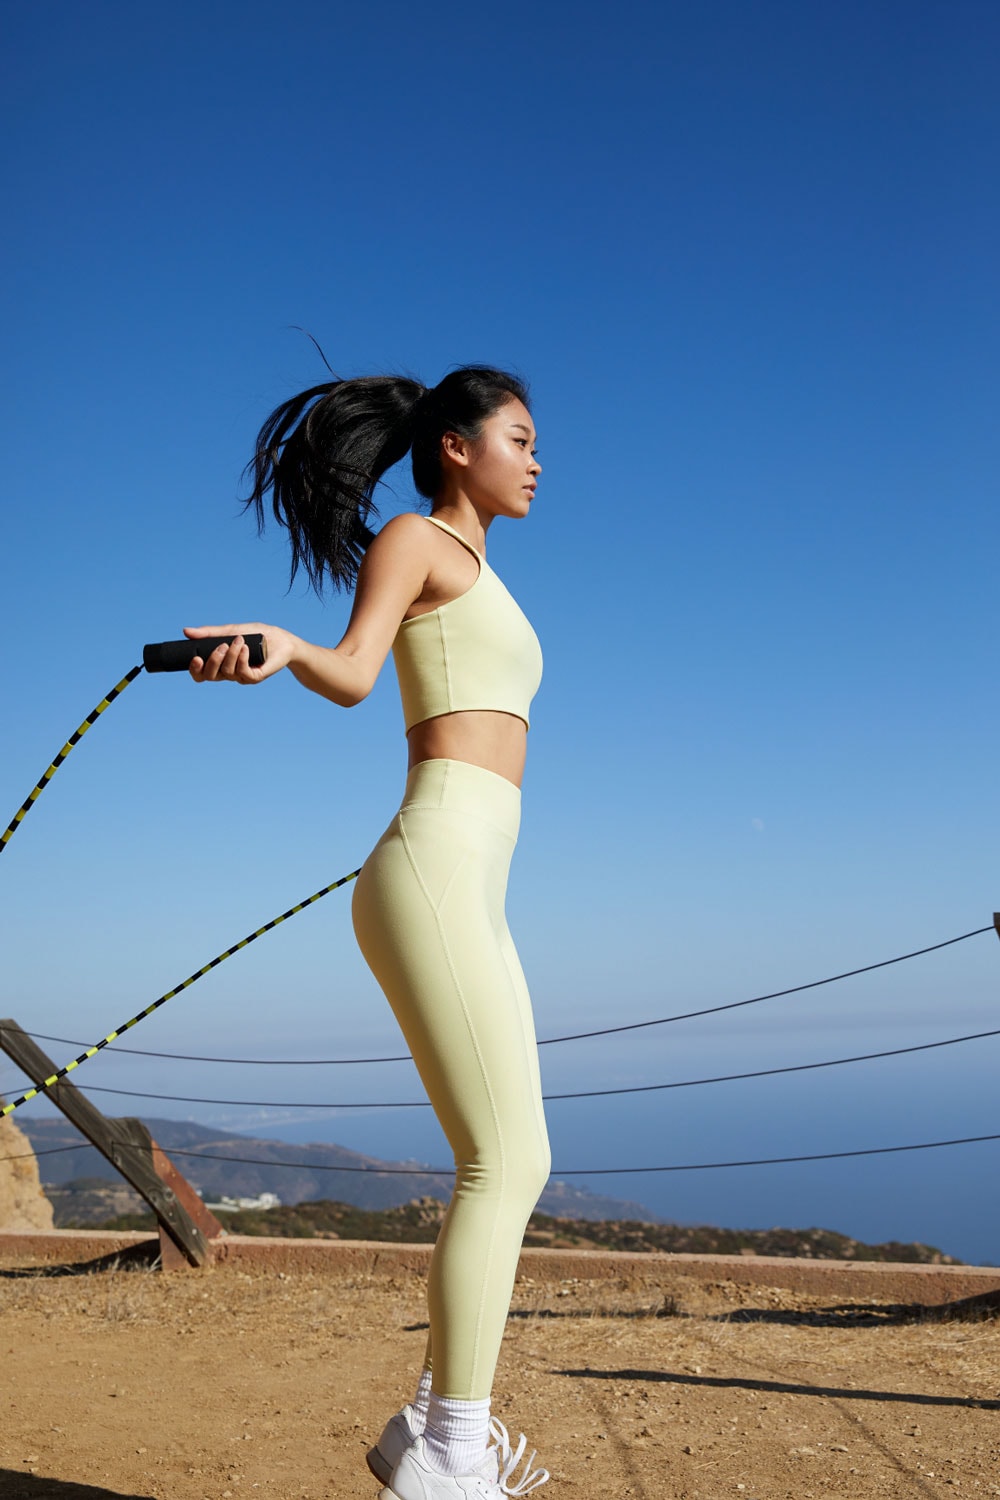 pacsun activewear fitness wellness collection announces new category